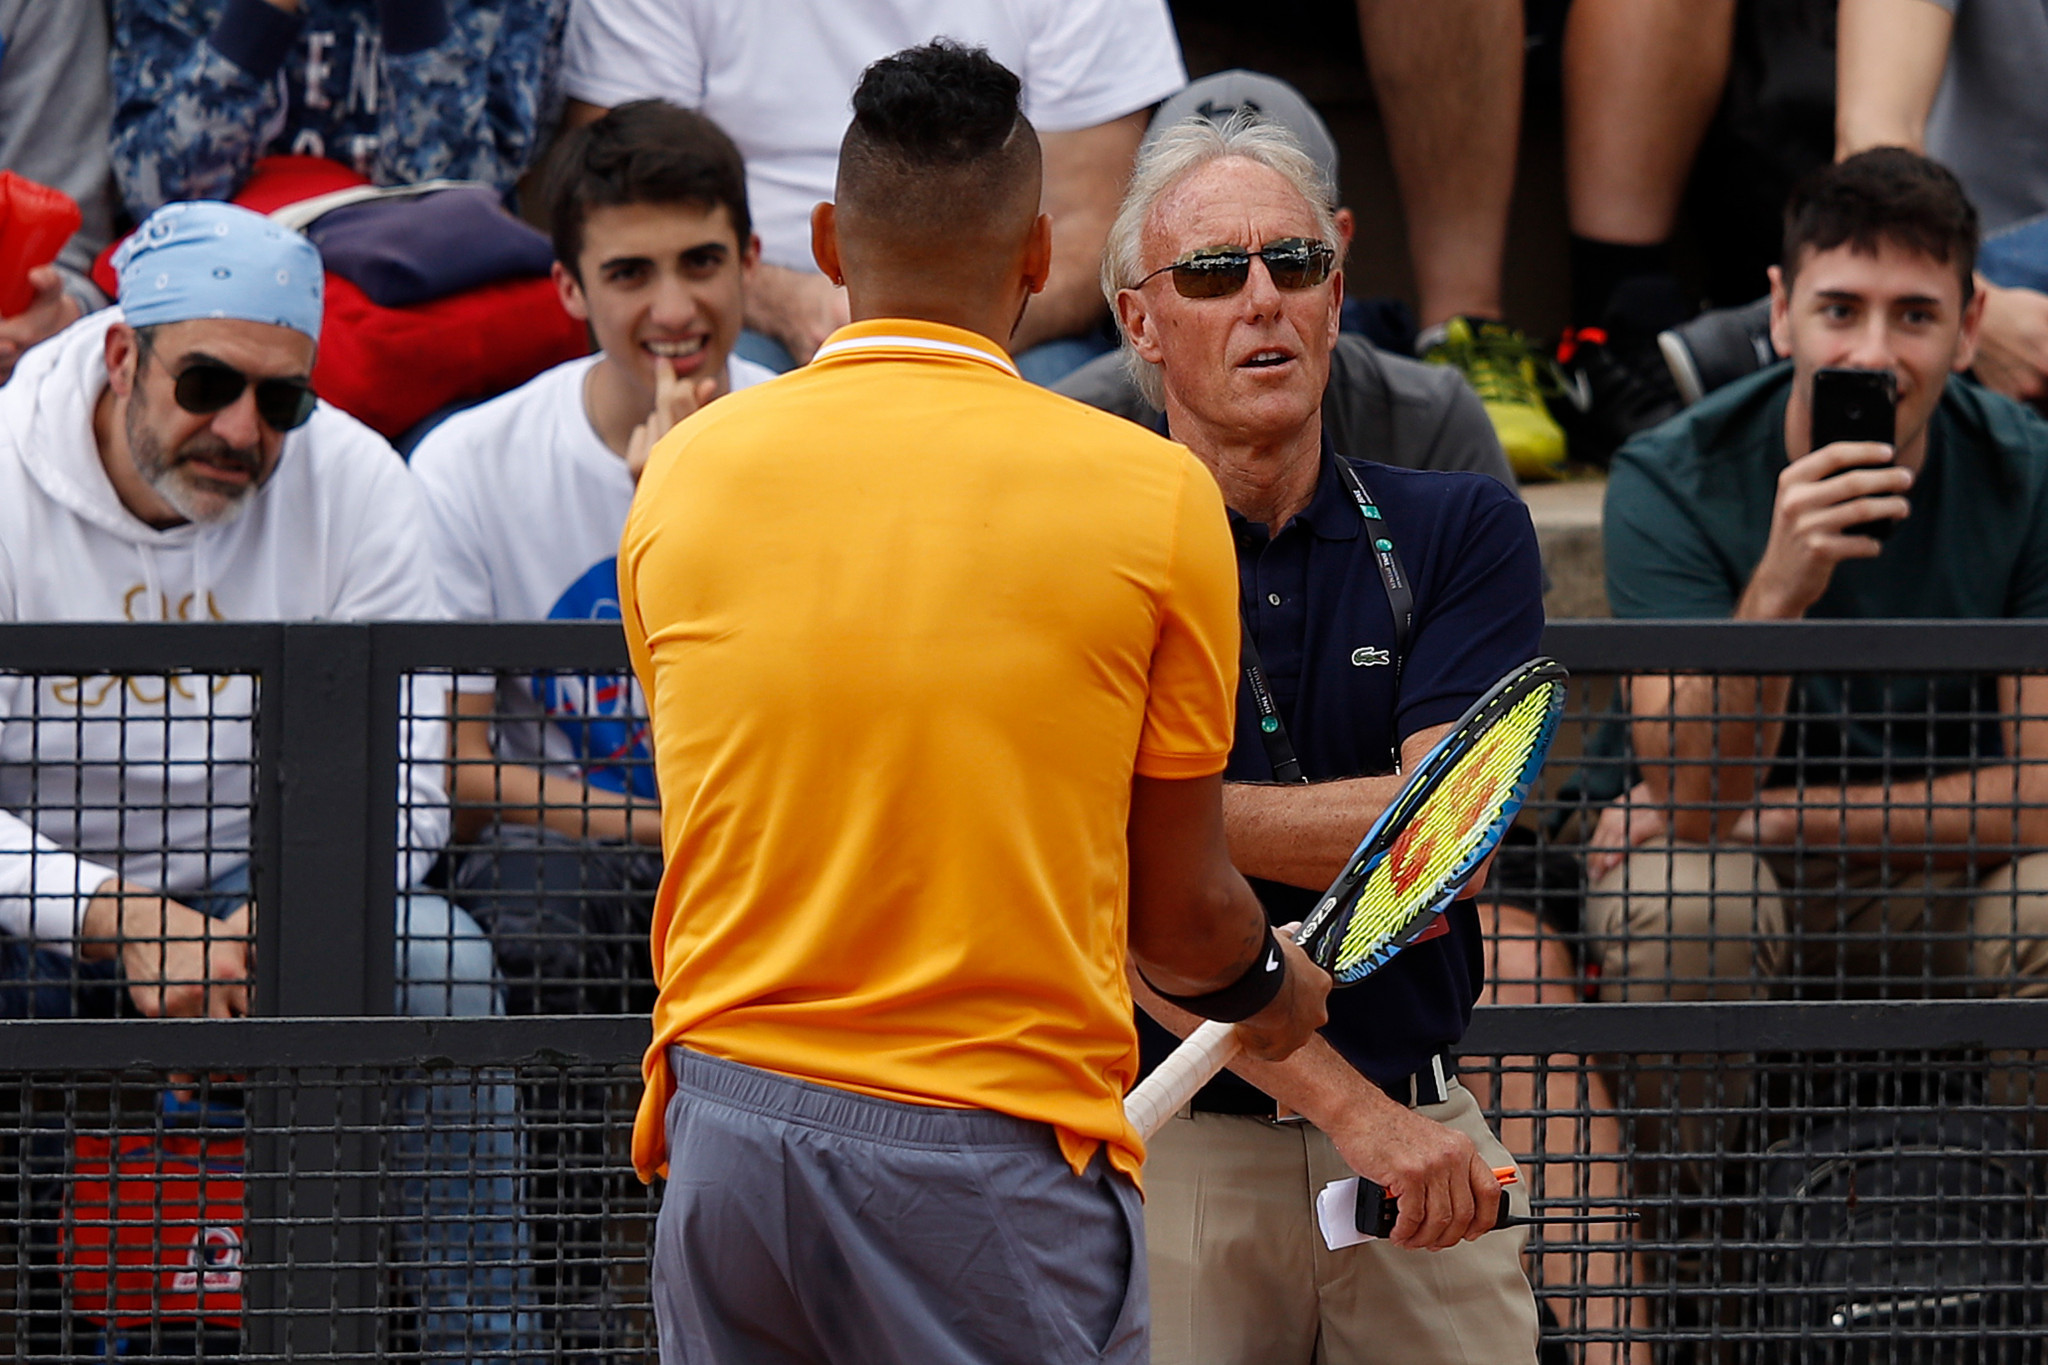 Australian Nick Kyrgios stole the headlines for the wrong reasons once again as he stormed off court at the Italian Open ©Getty Images